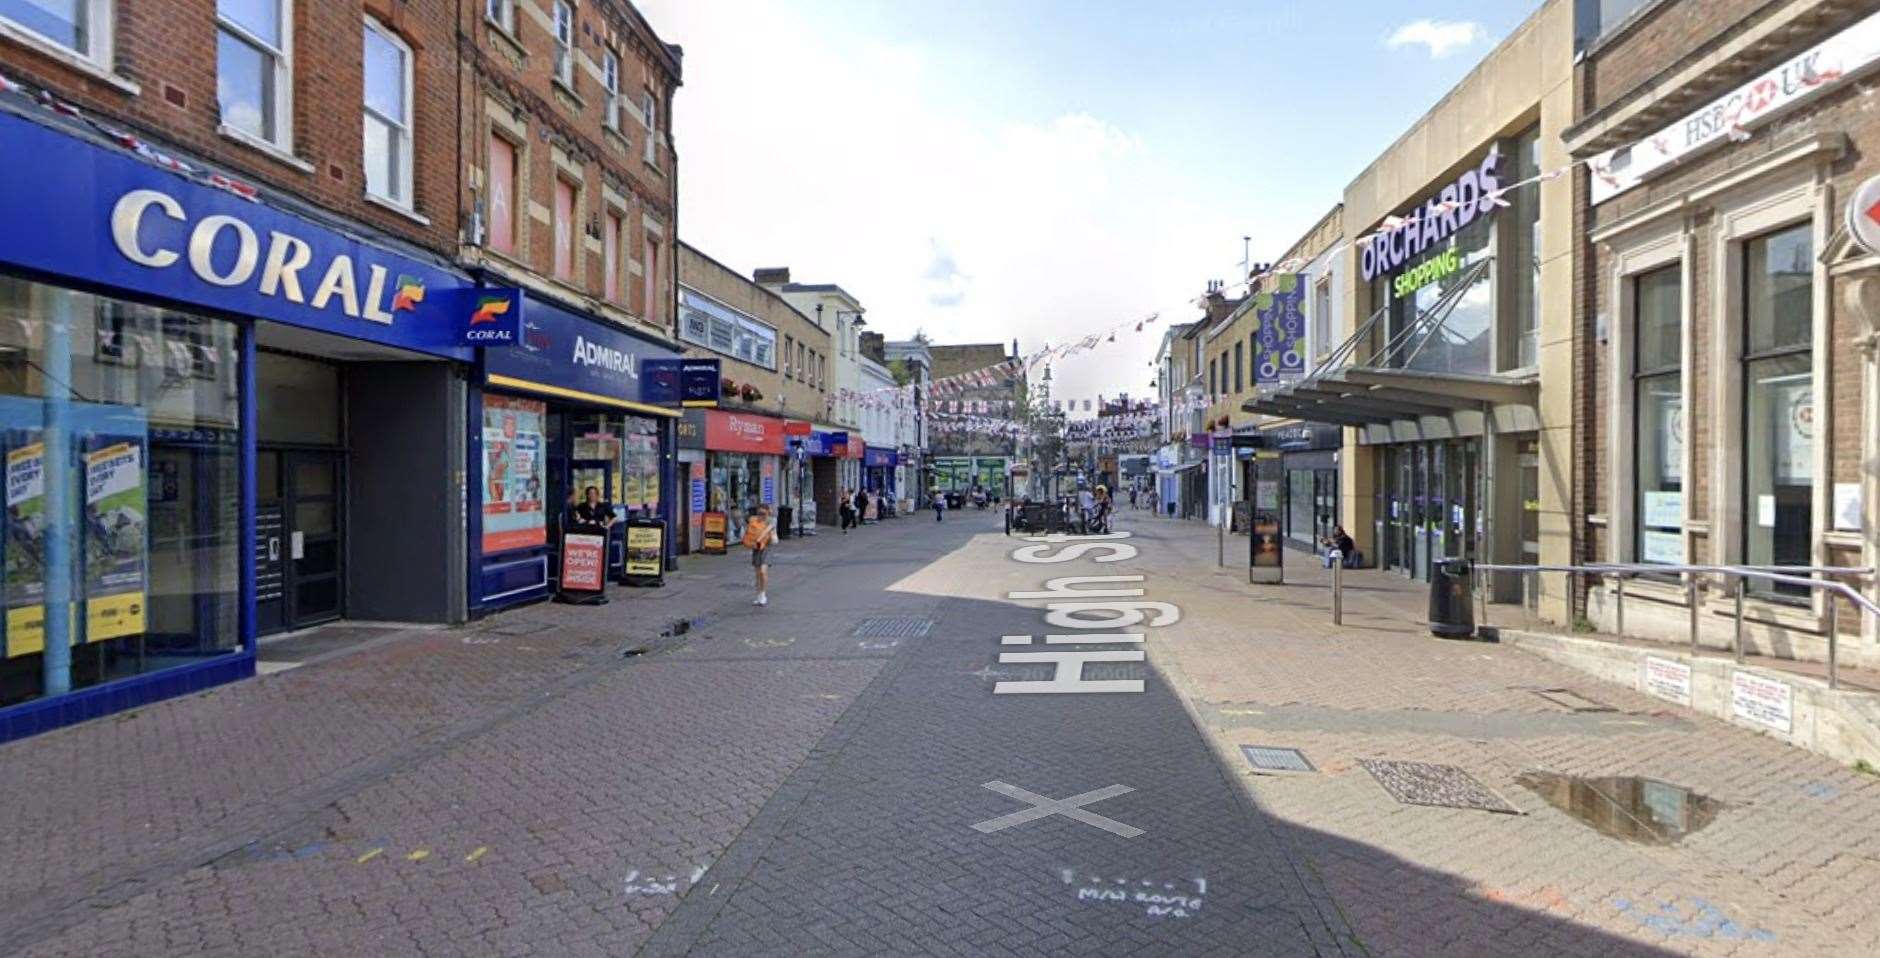 The robbery took place in Dartford High Street. Picture: Google Maps